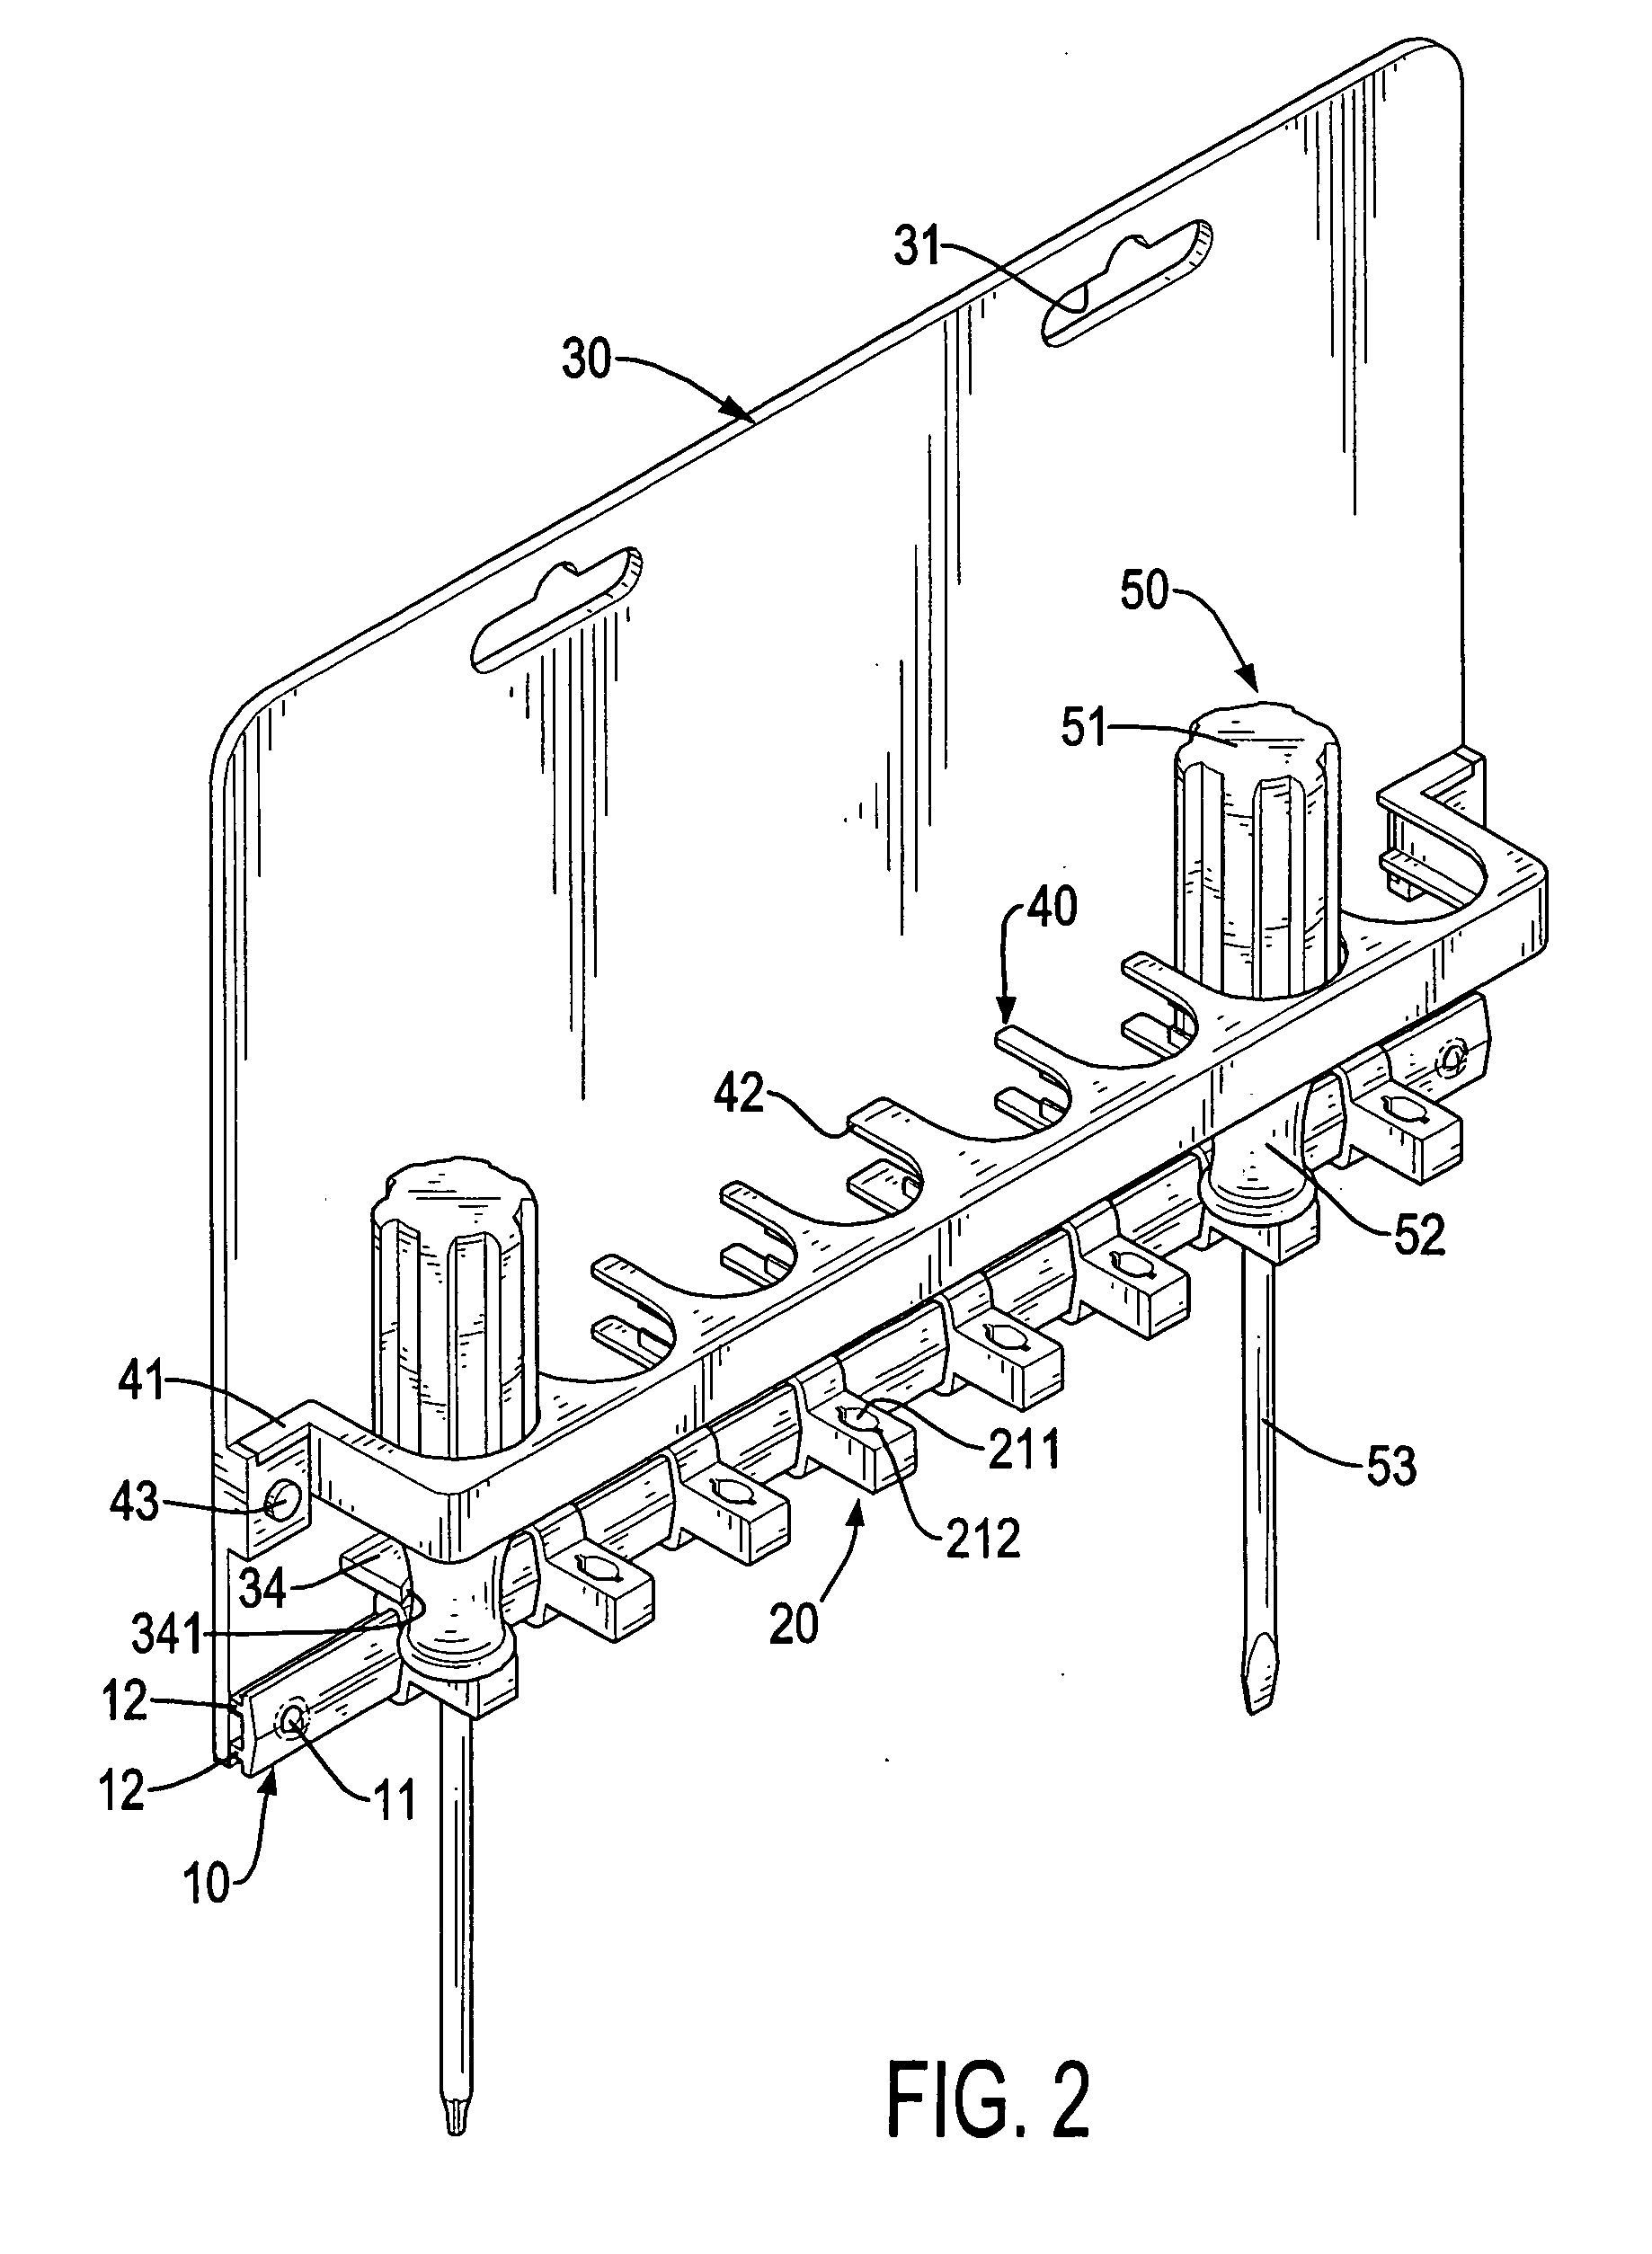 Suspending device for screwdrivers